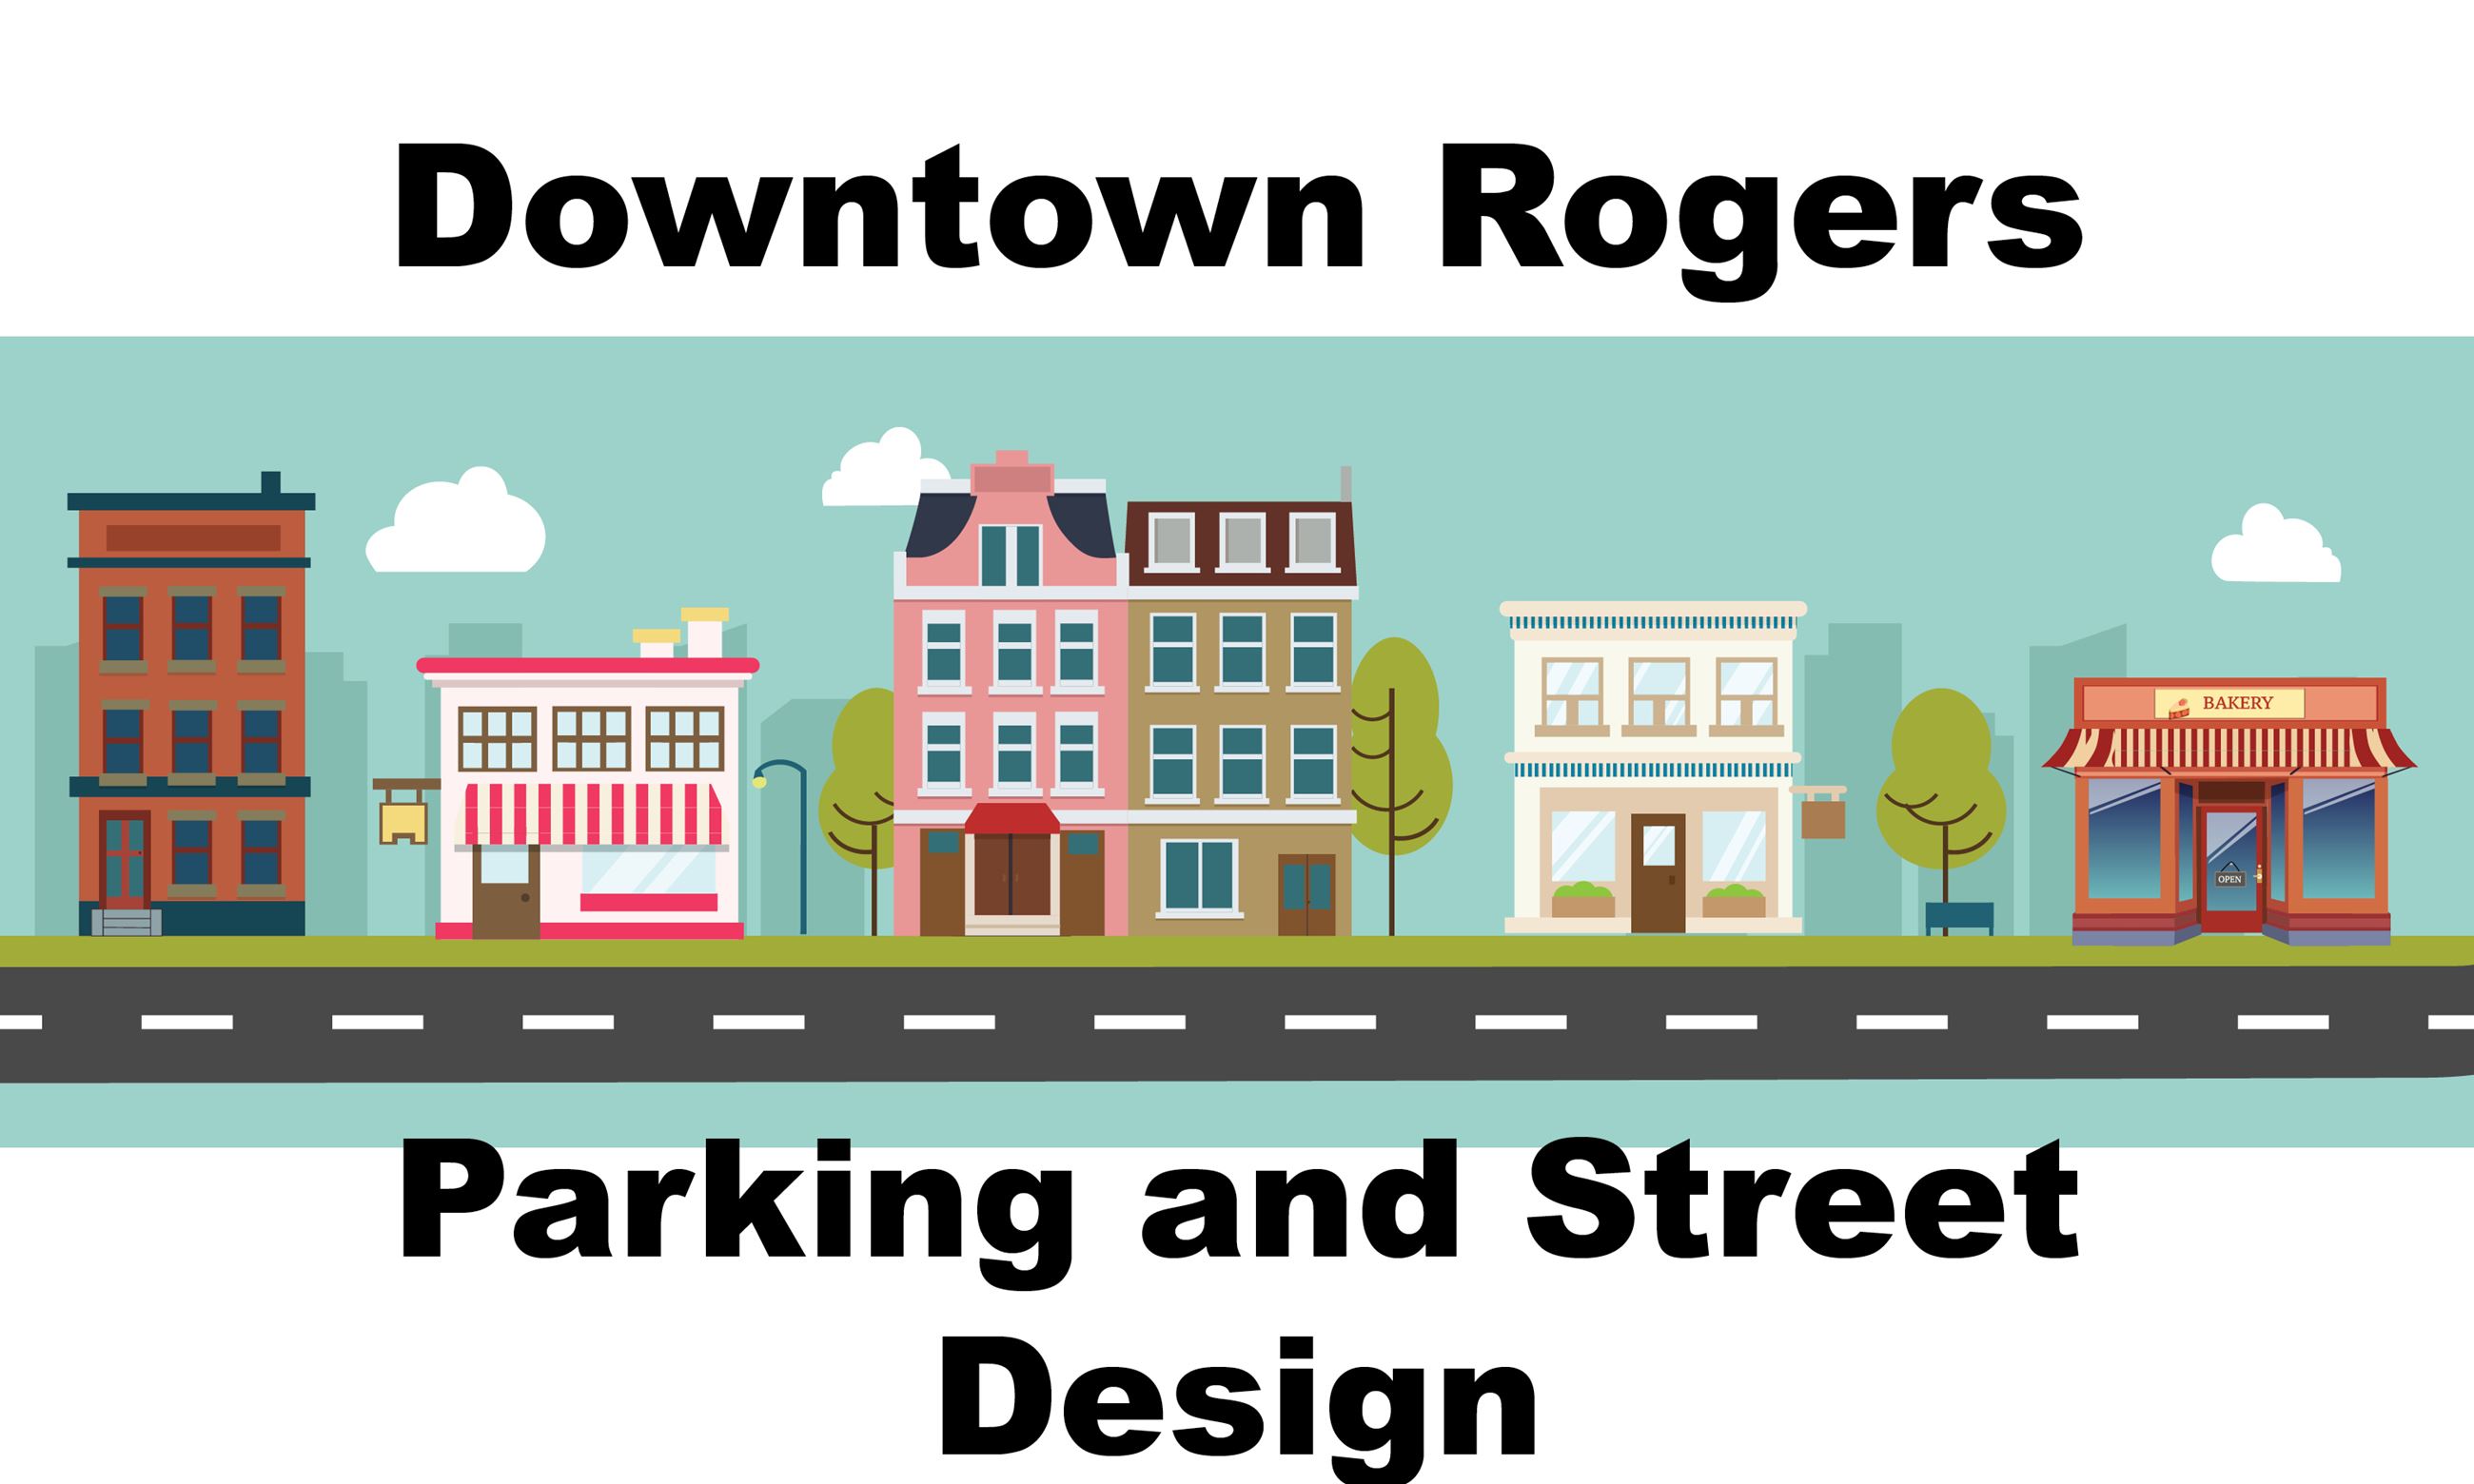 DTR Parking and Street Design 